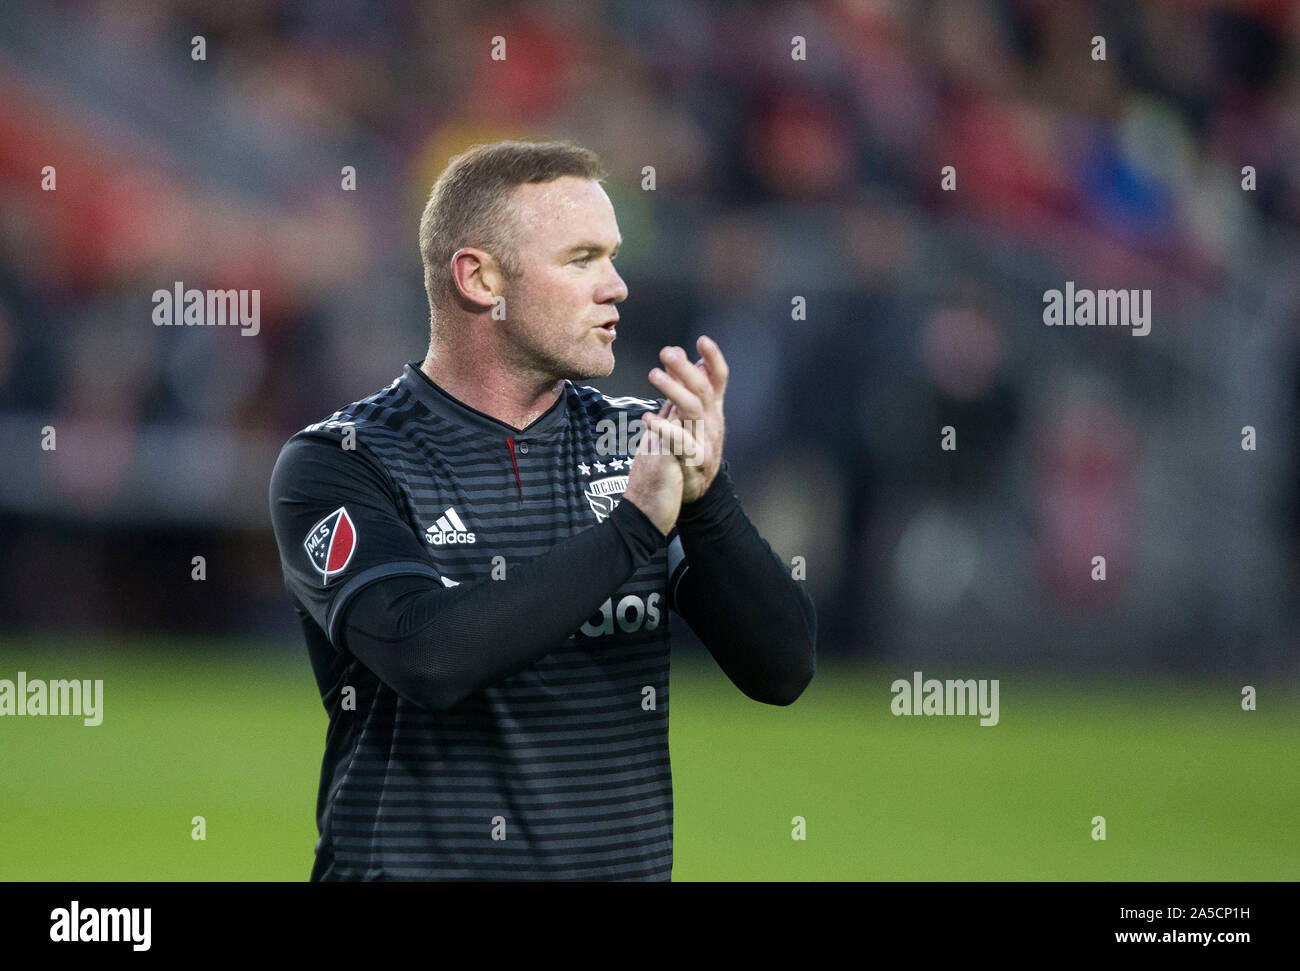 Toronto, Canada. 19th Oct, 2019. Wayne Rooney of D.C. United reacts during the first round match of the 2019 Major League Soccer (MLS) Cup Playoffs between D.C. United and Toronto FC at BMO Field in Toronto, Canada, Oct. 19, 2019. Credit: Zou Zheng/Xinhua/Alamy Live News Stock Photo